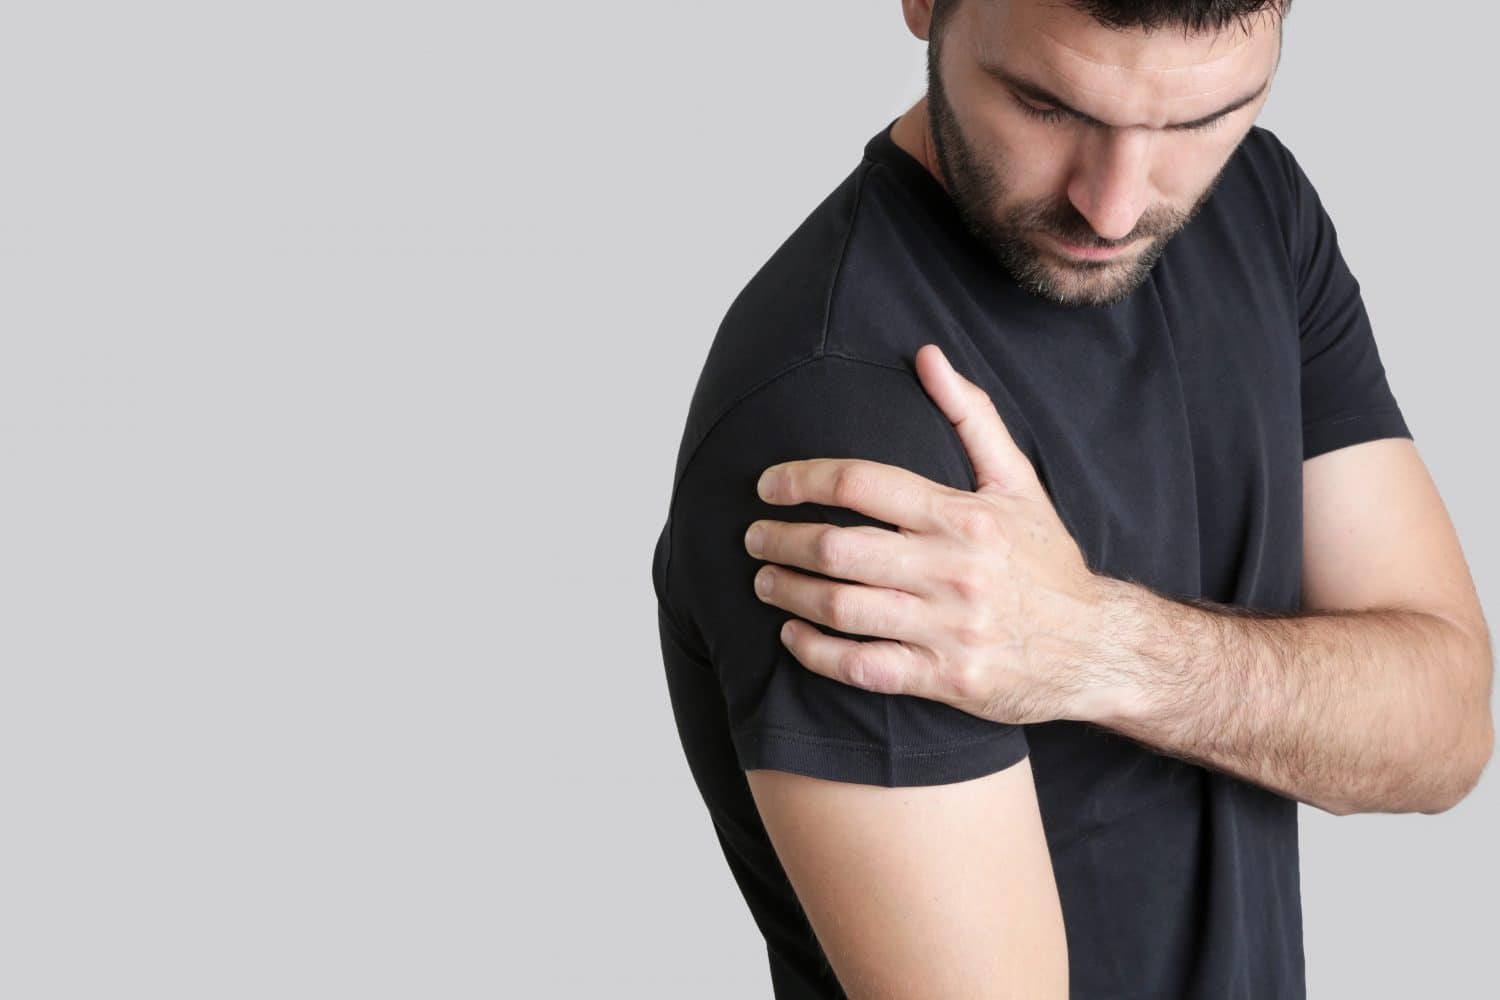 How Do Car Crashes Cause Shoulder Injuries?